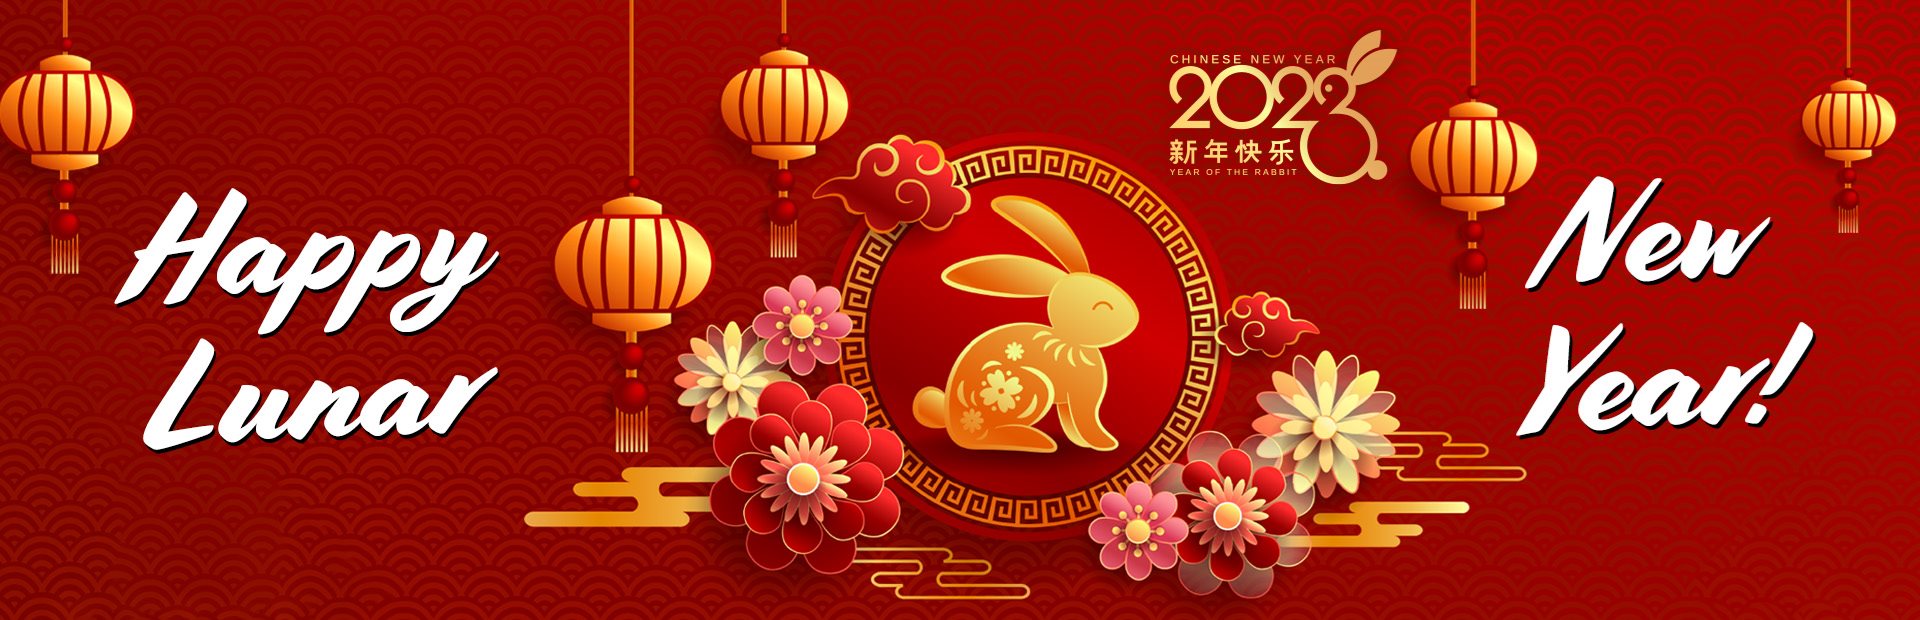 Mobile: Chinese New Year